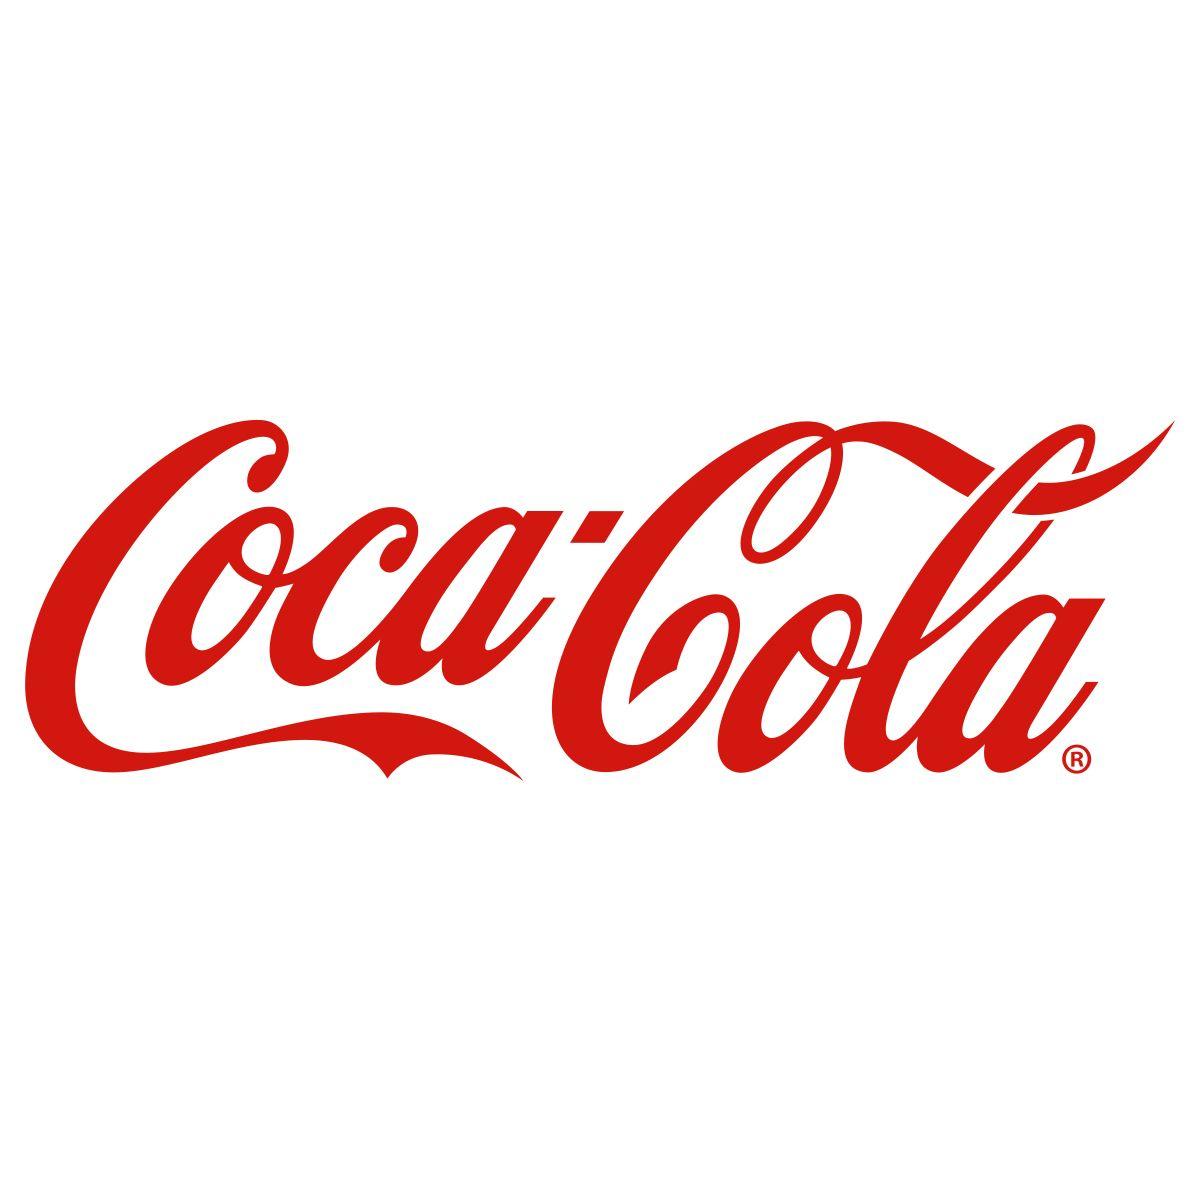 1910s Logo - Coca Cola Script Logo Cut Out Vinyl Decal 1910s Style In 2019